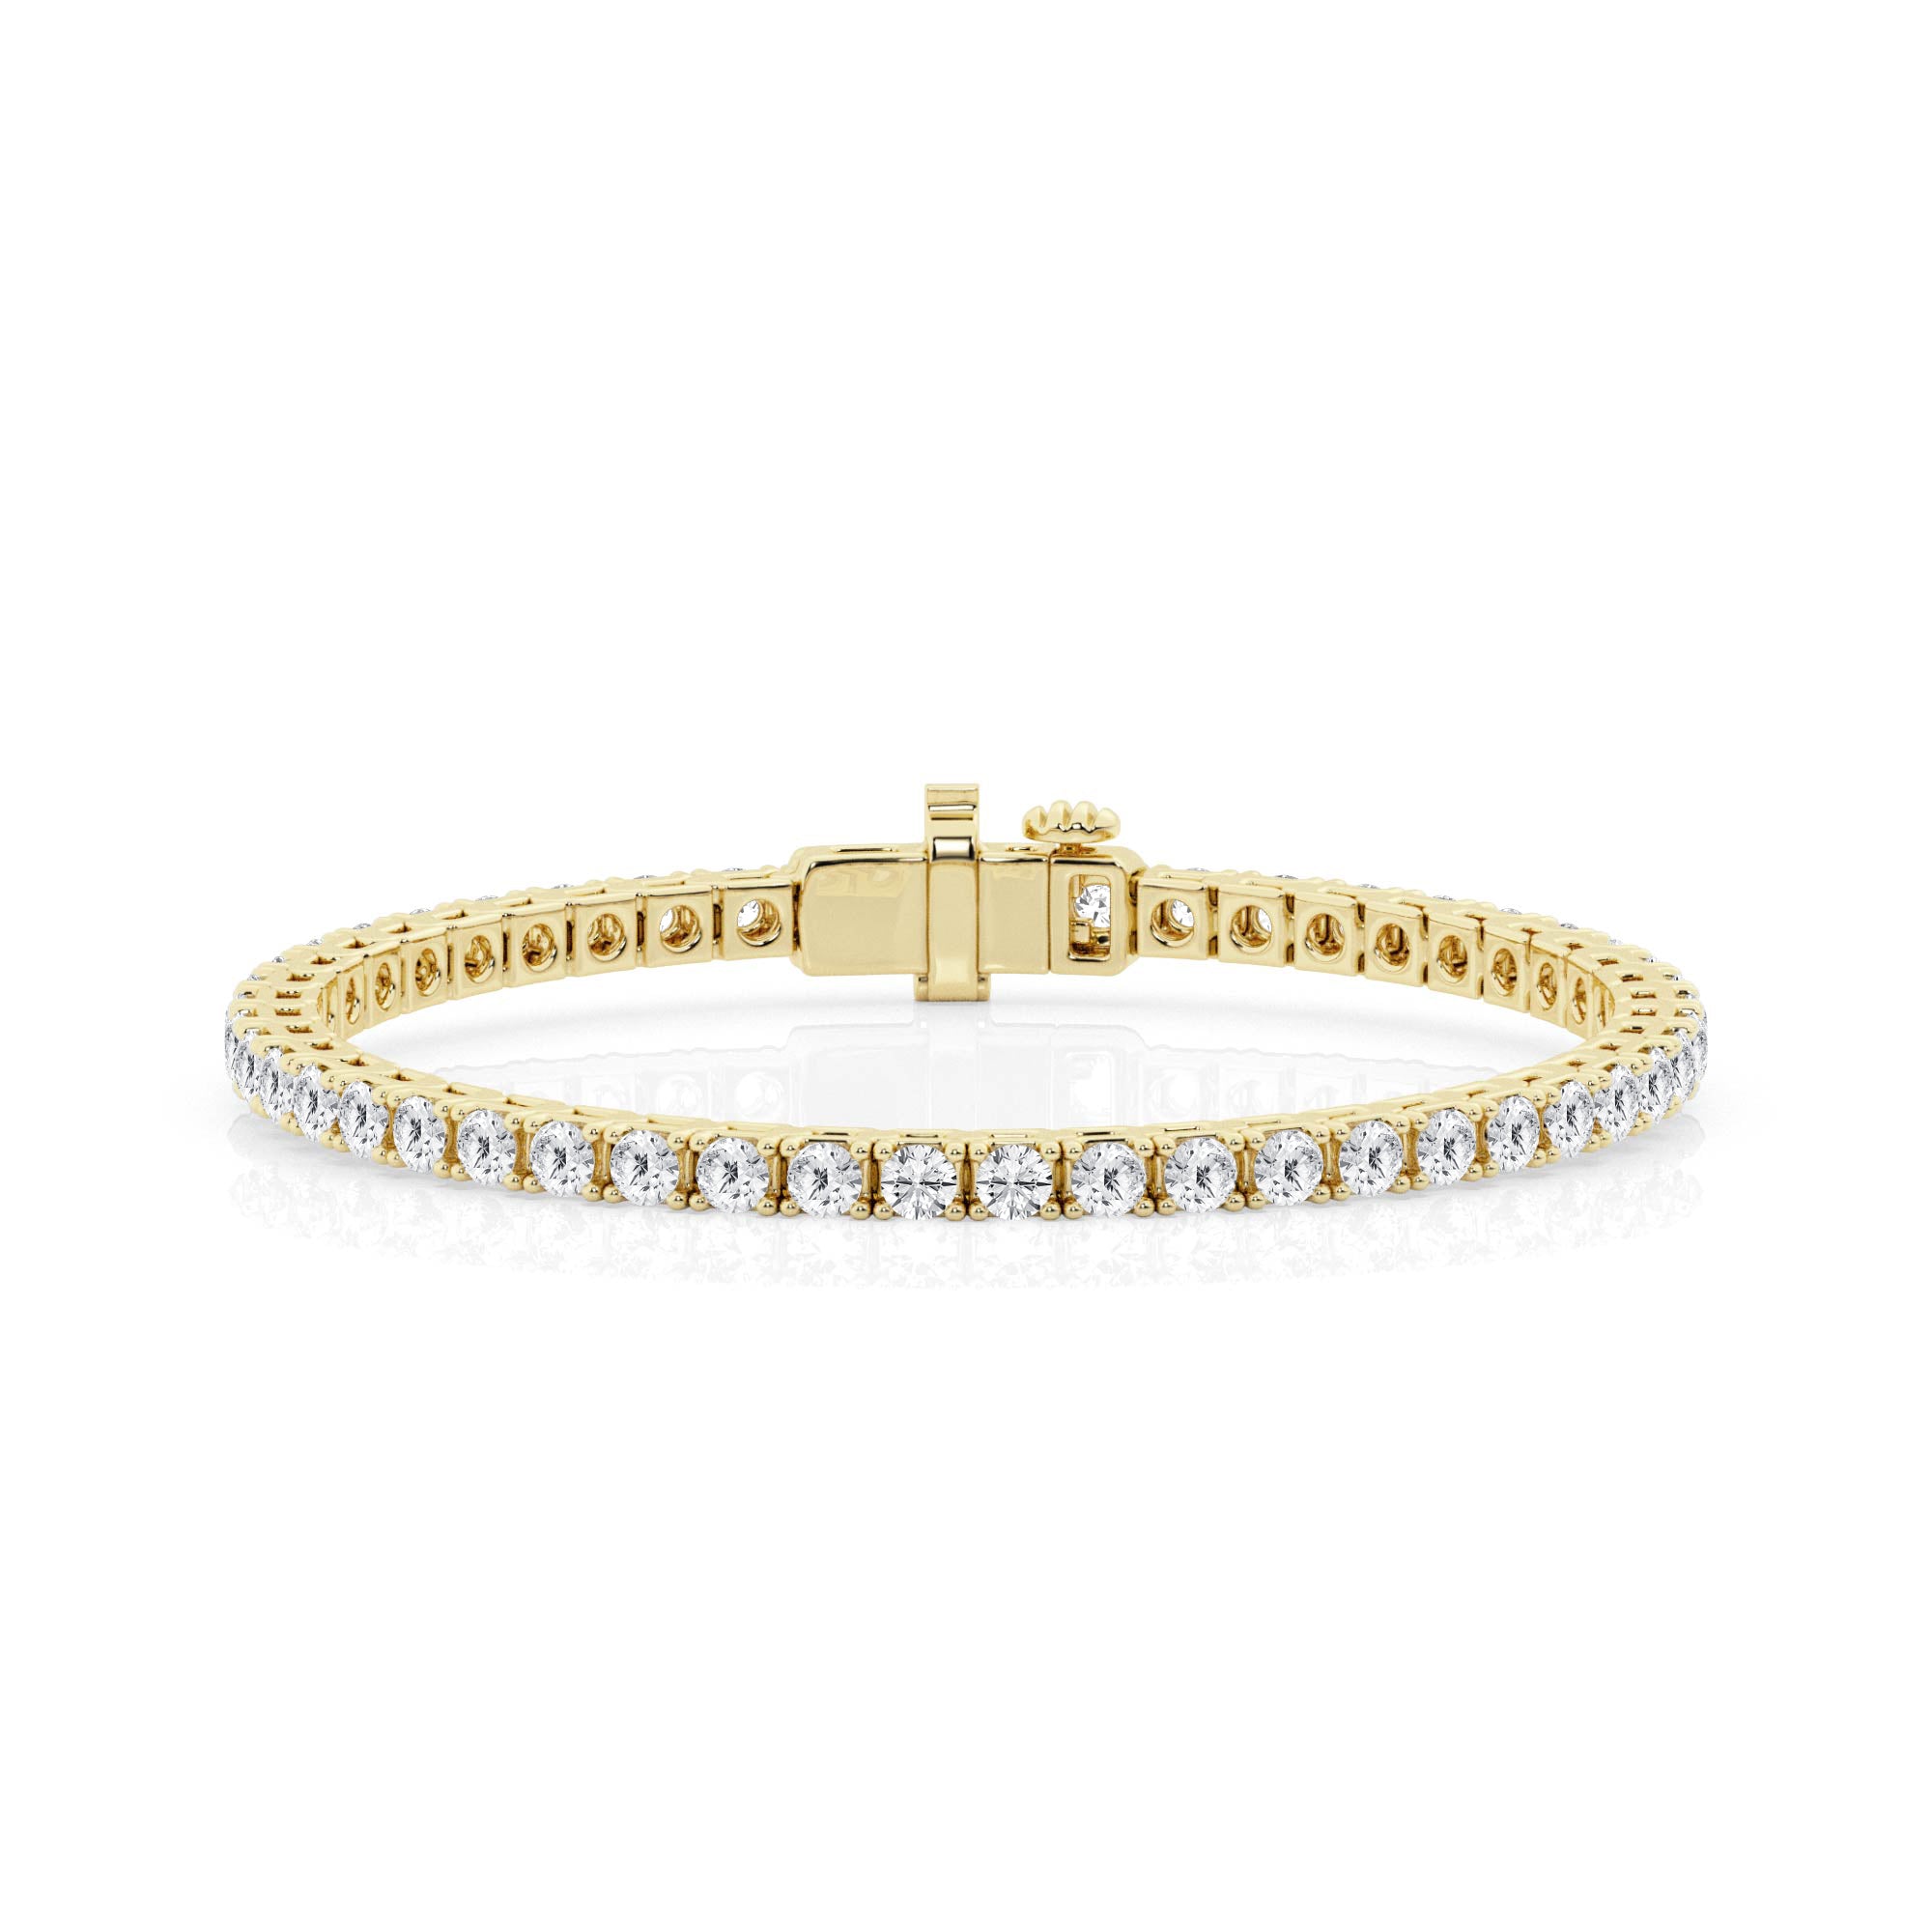 Lab-grown yellow gold tennis bracelet with 10 carats.